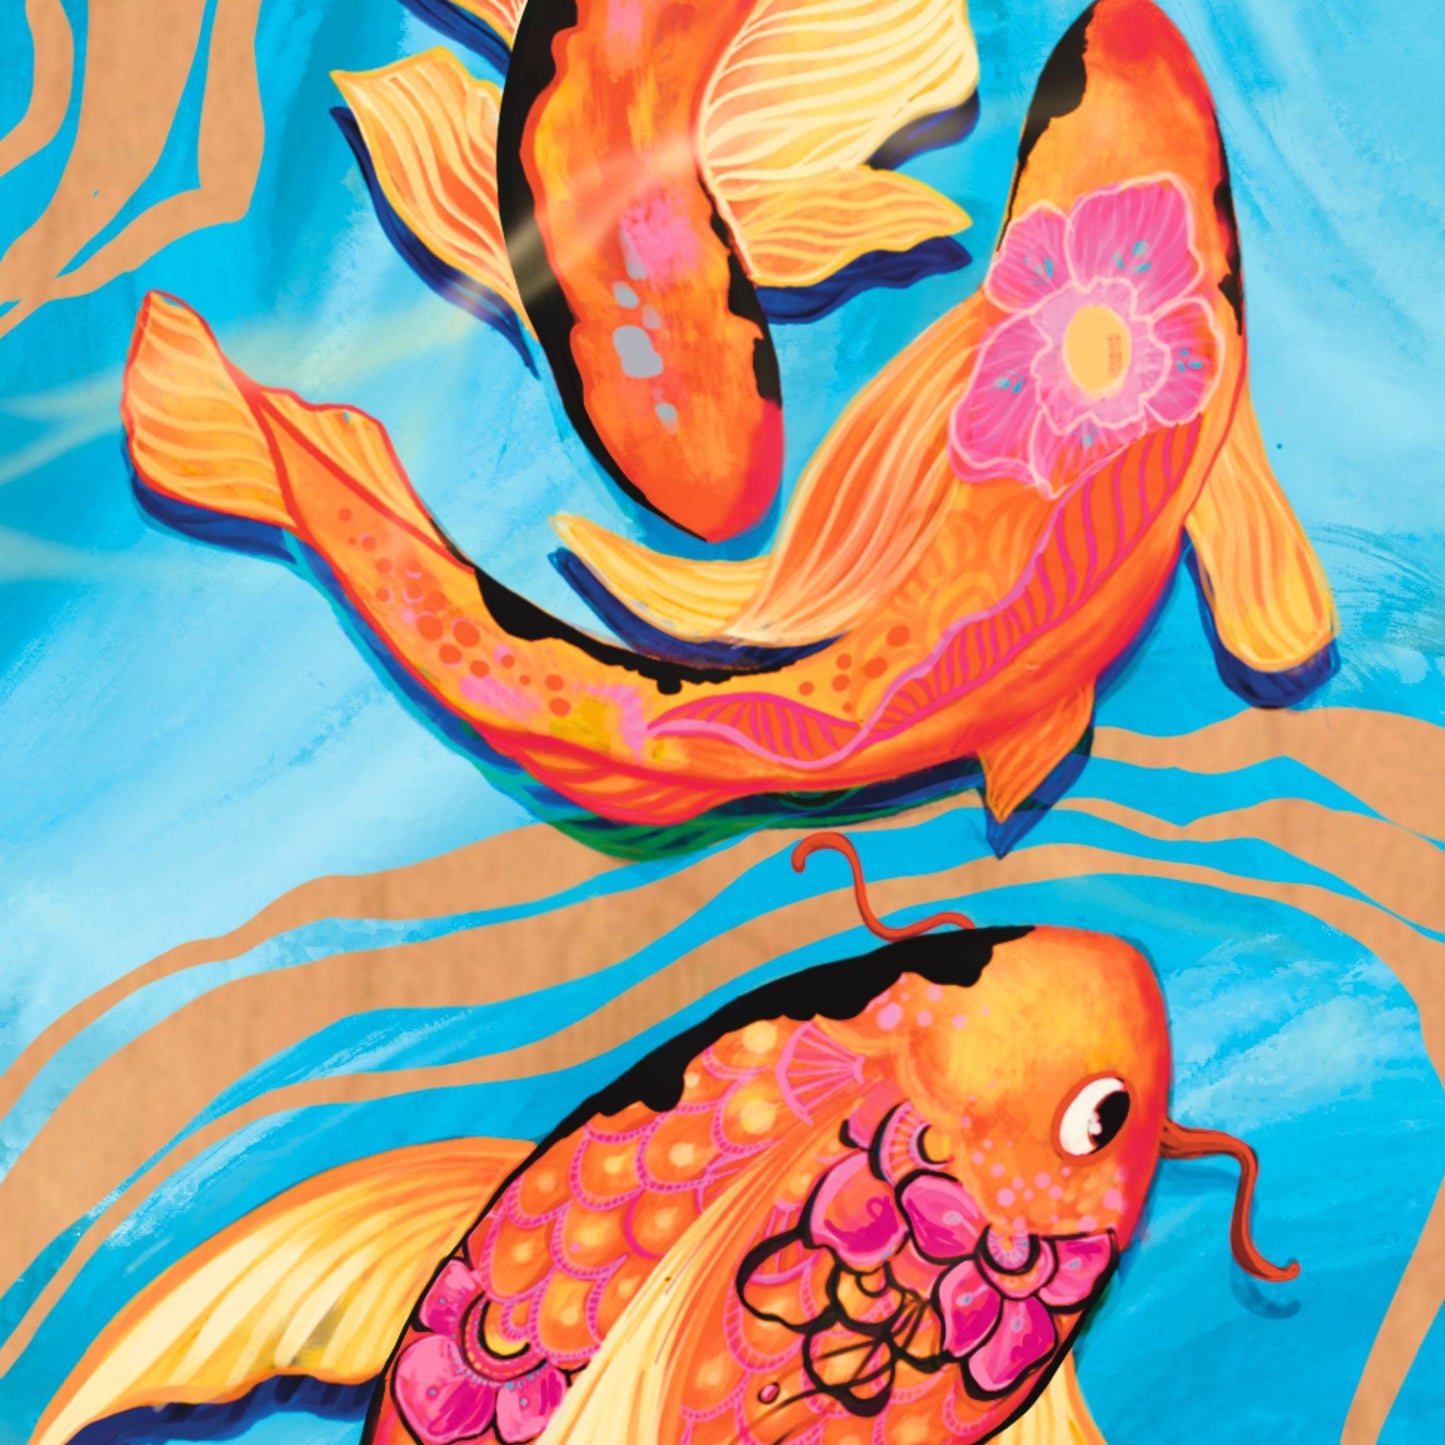 Koi Fish - UV print on a wooden cell phone holder (iPhone Android).